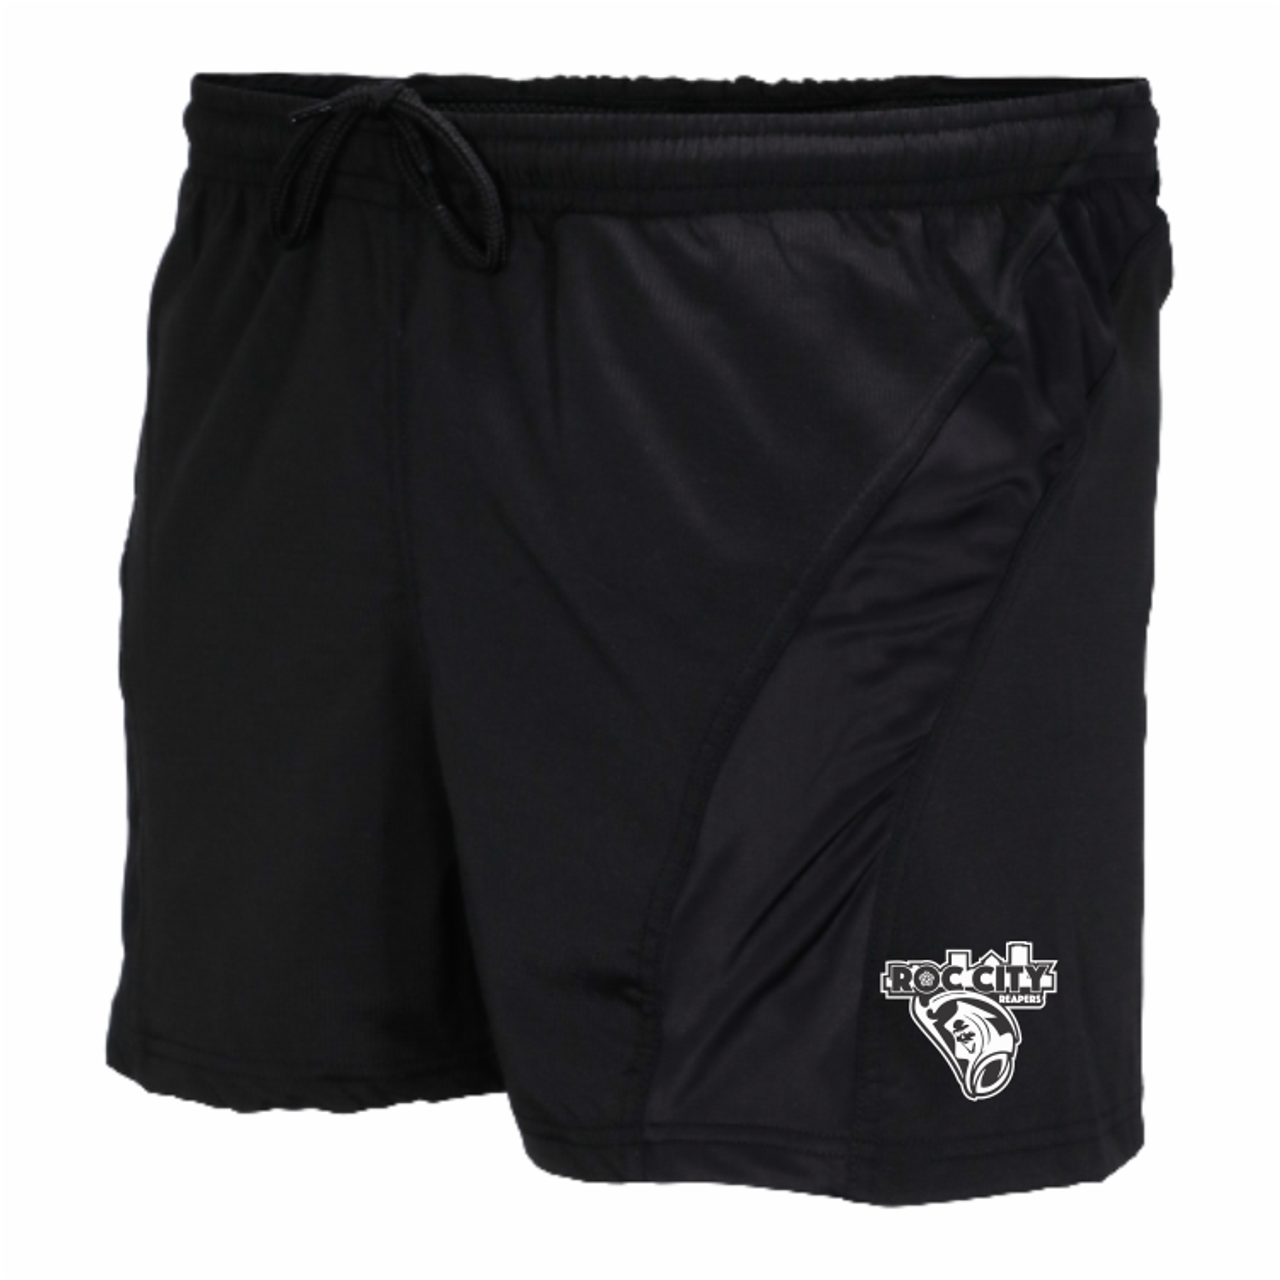 Roc City Reapers Rugby Performance Rugby Shorts